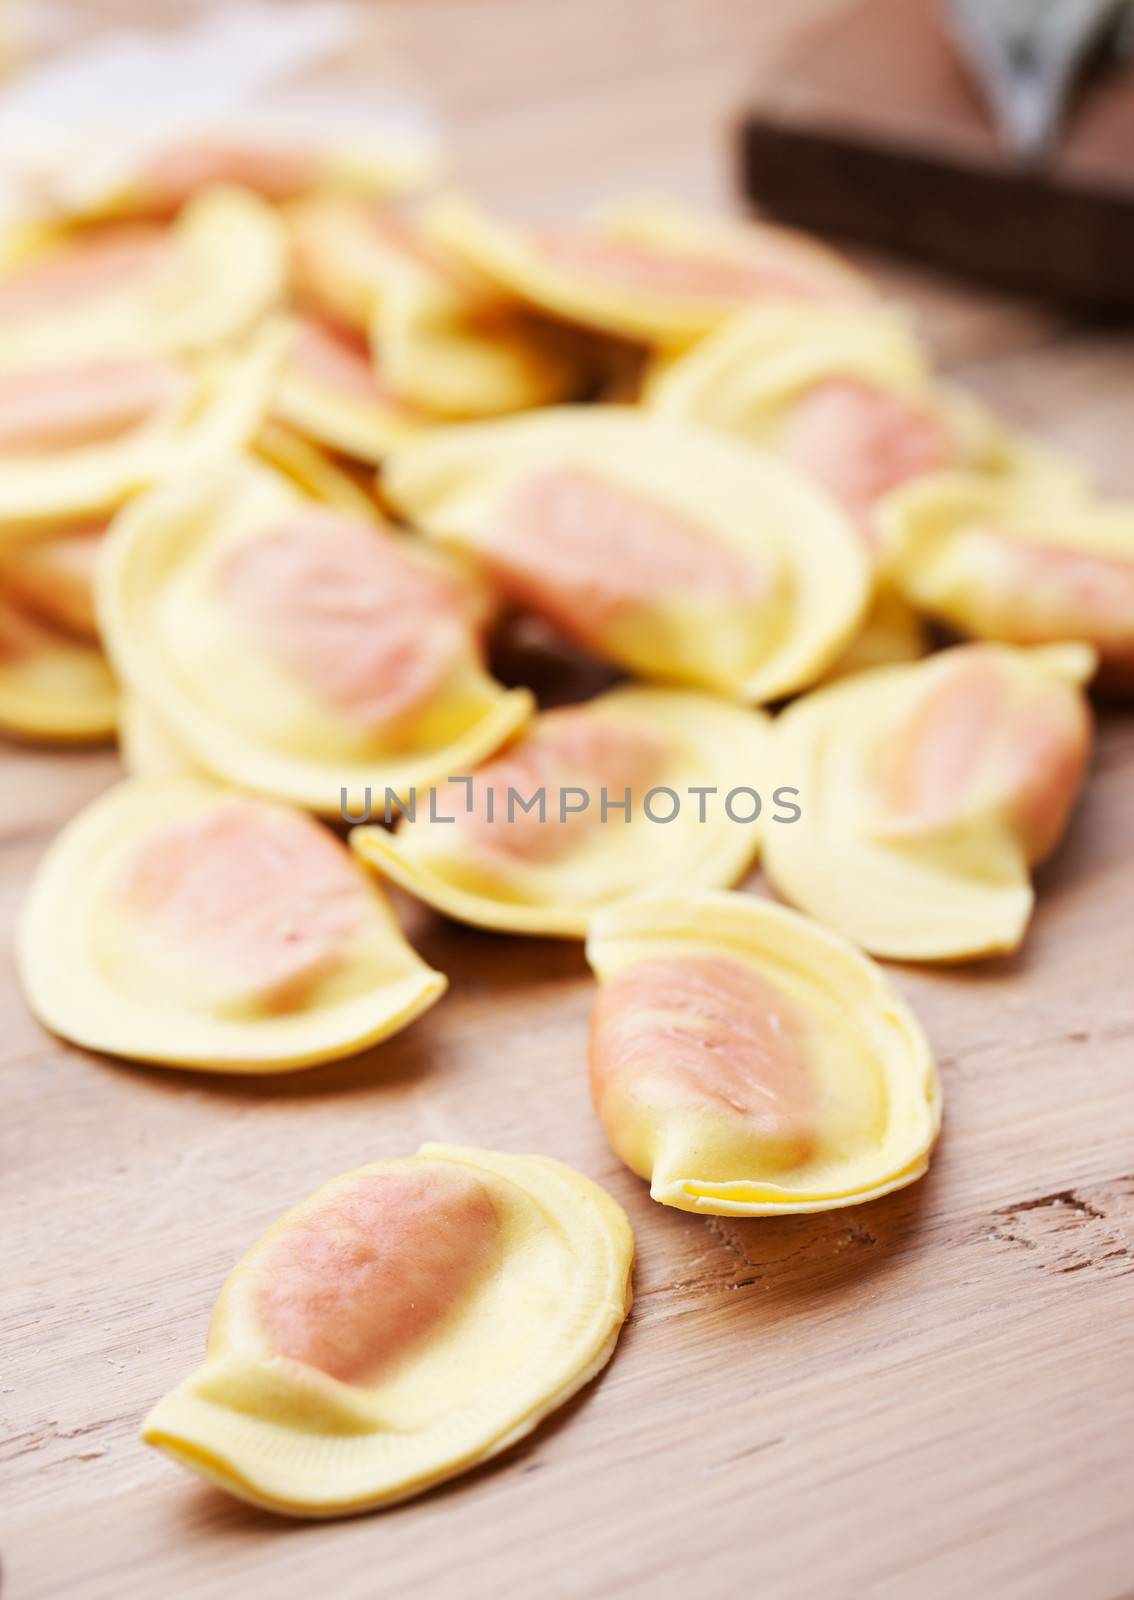 Handmade ravioli with red filling on wooden table.